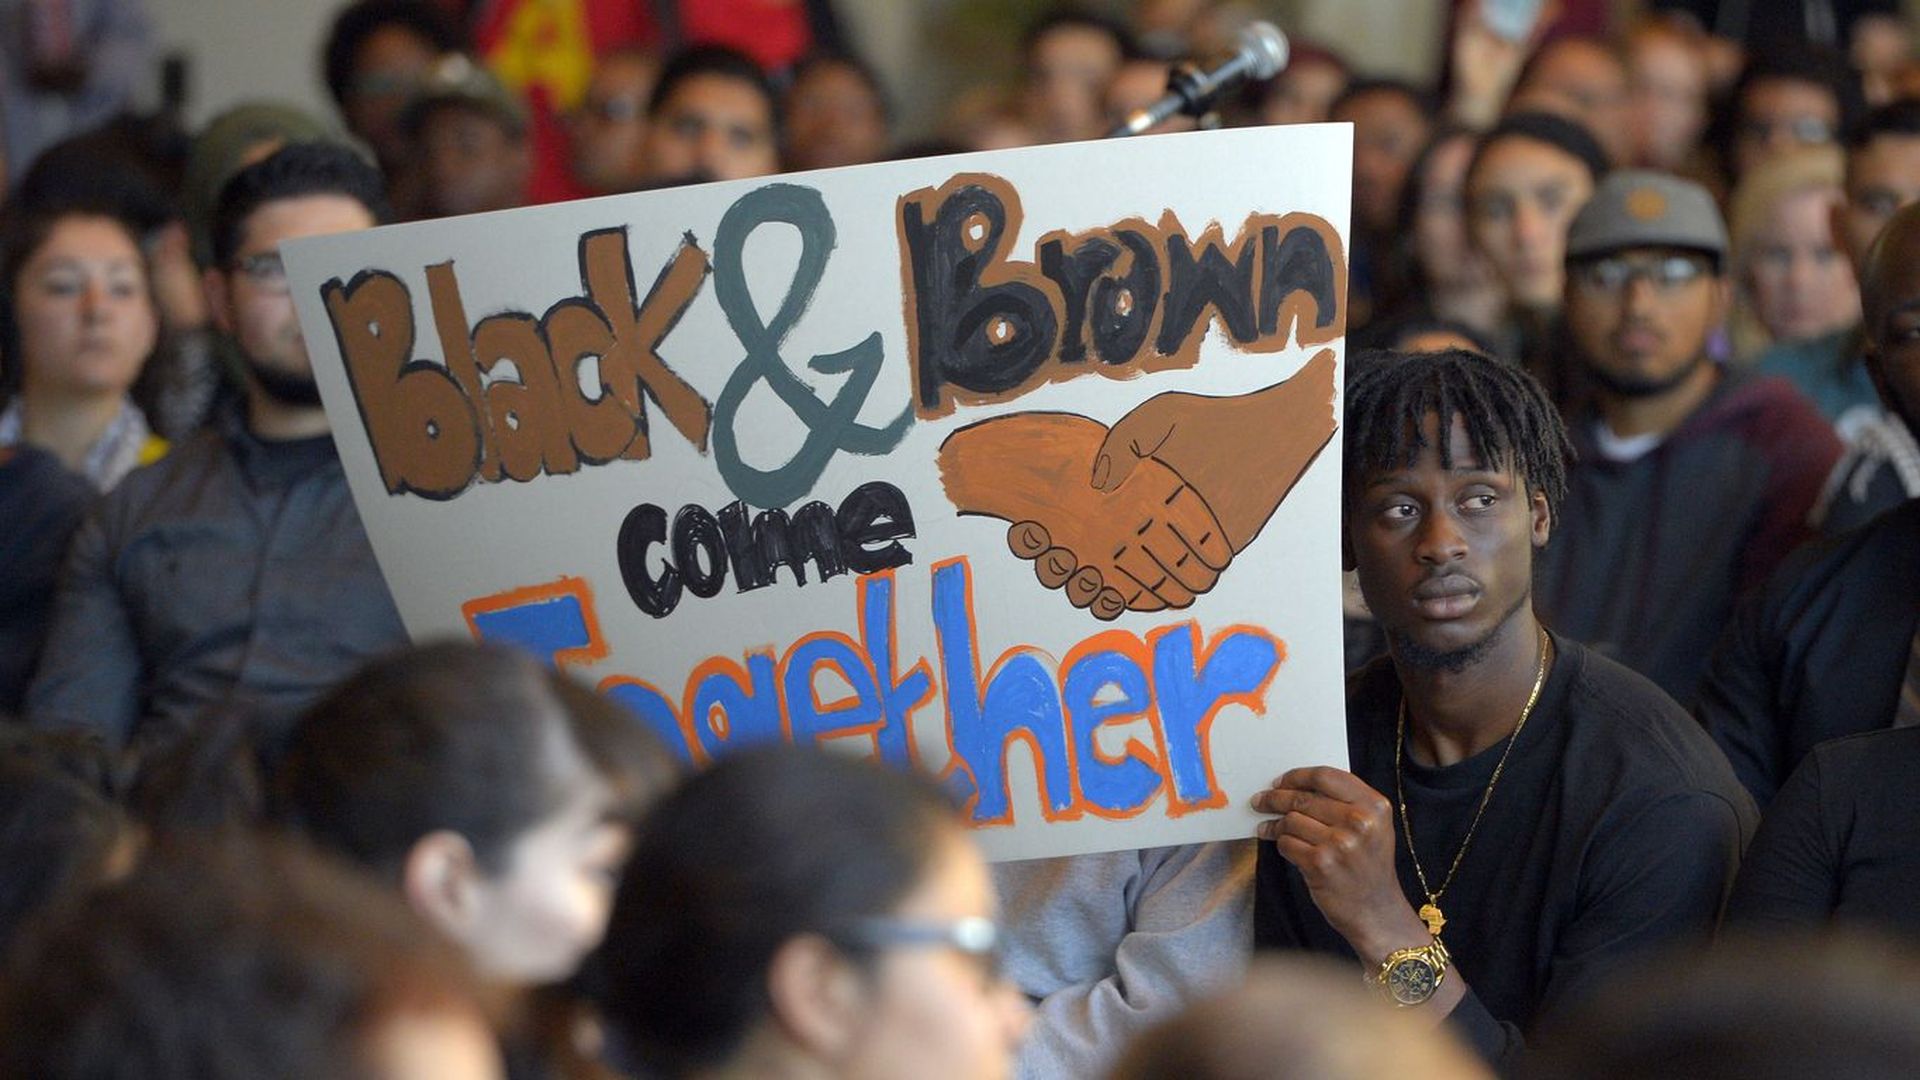 A man holds up a sign that says "black and brown come together" during a protest in Los Angeles